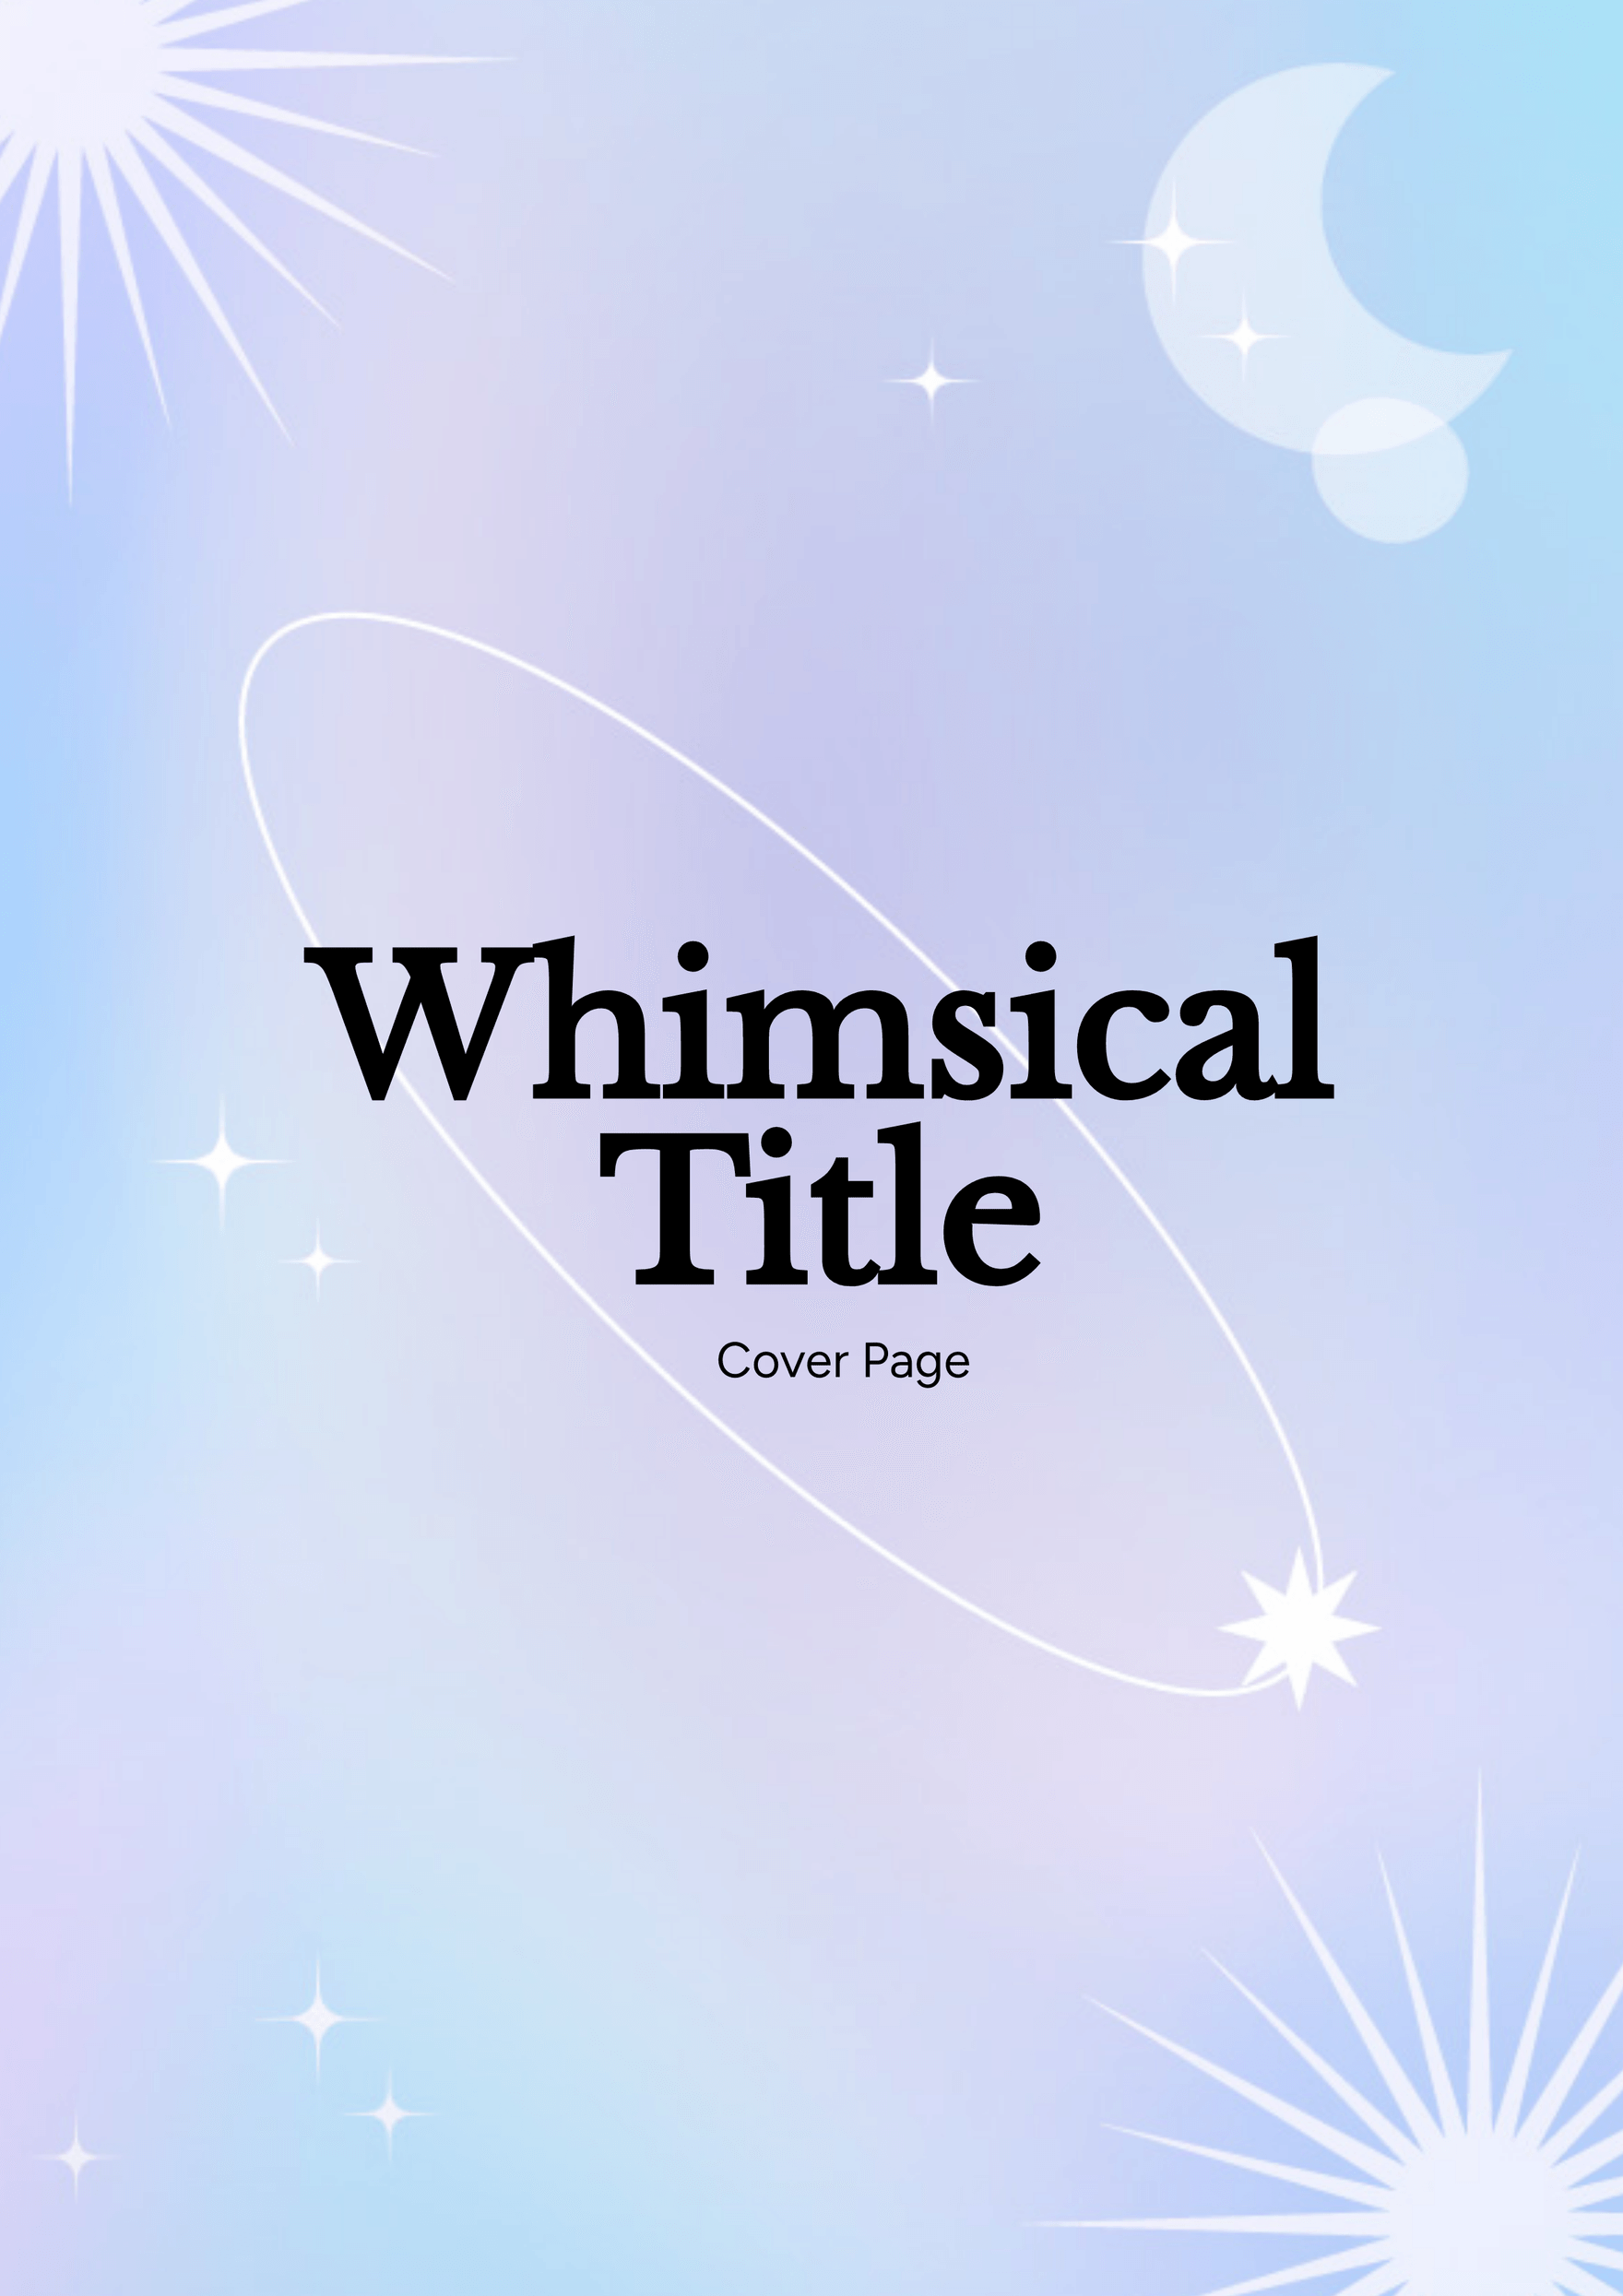 Whimsical Title Cover Page Template